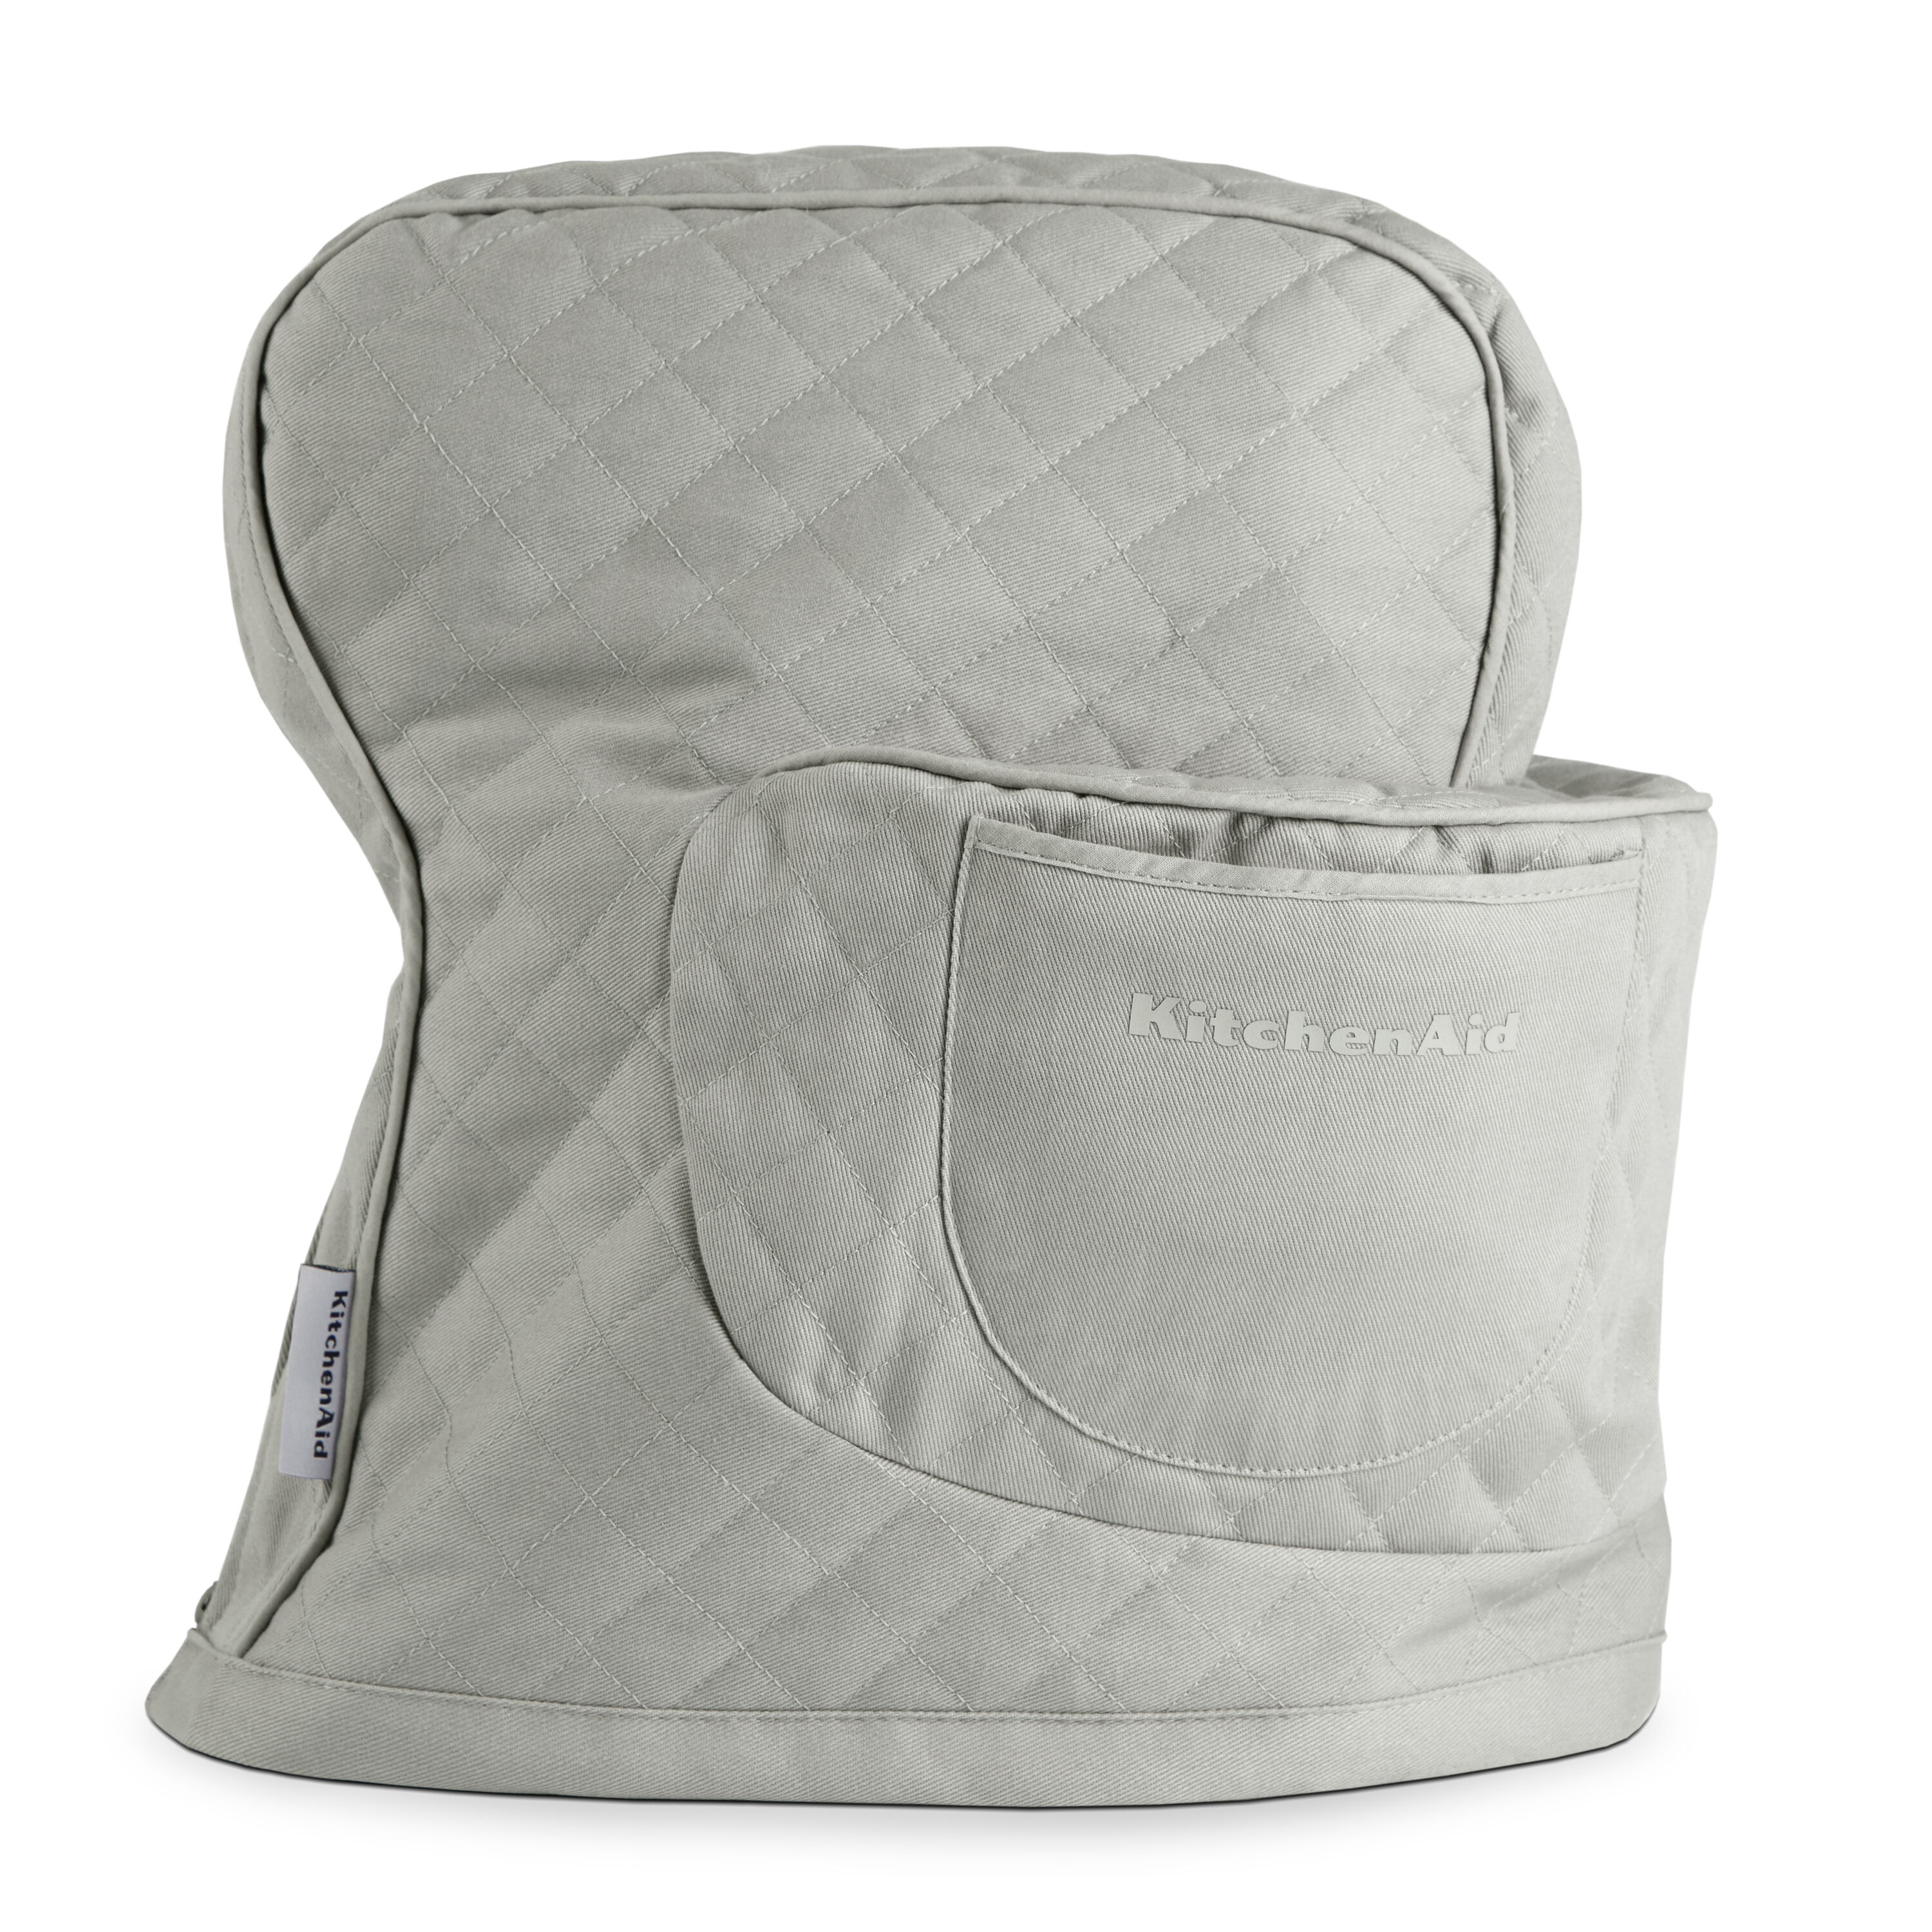  HOMEST Stand Mixer Quilted Dust Cover with Pockets